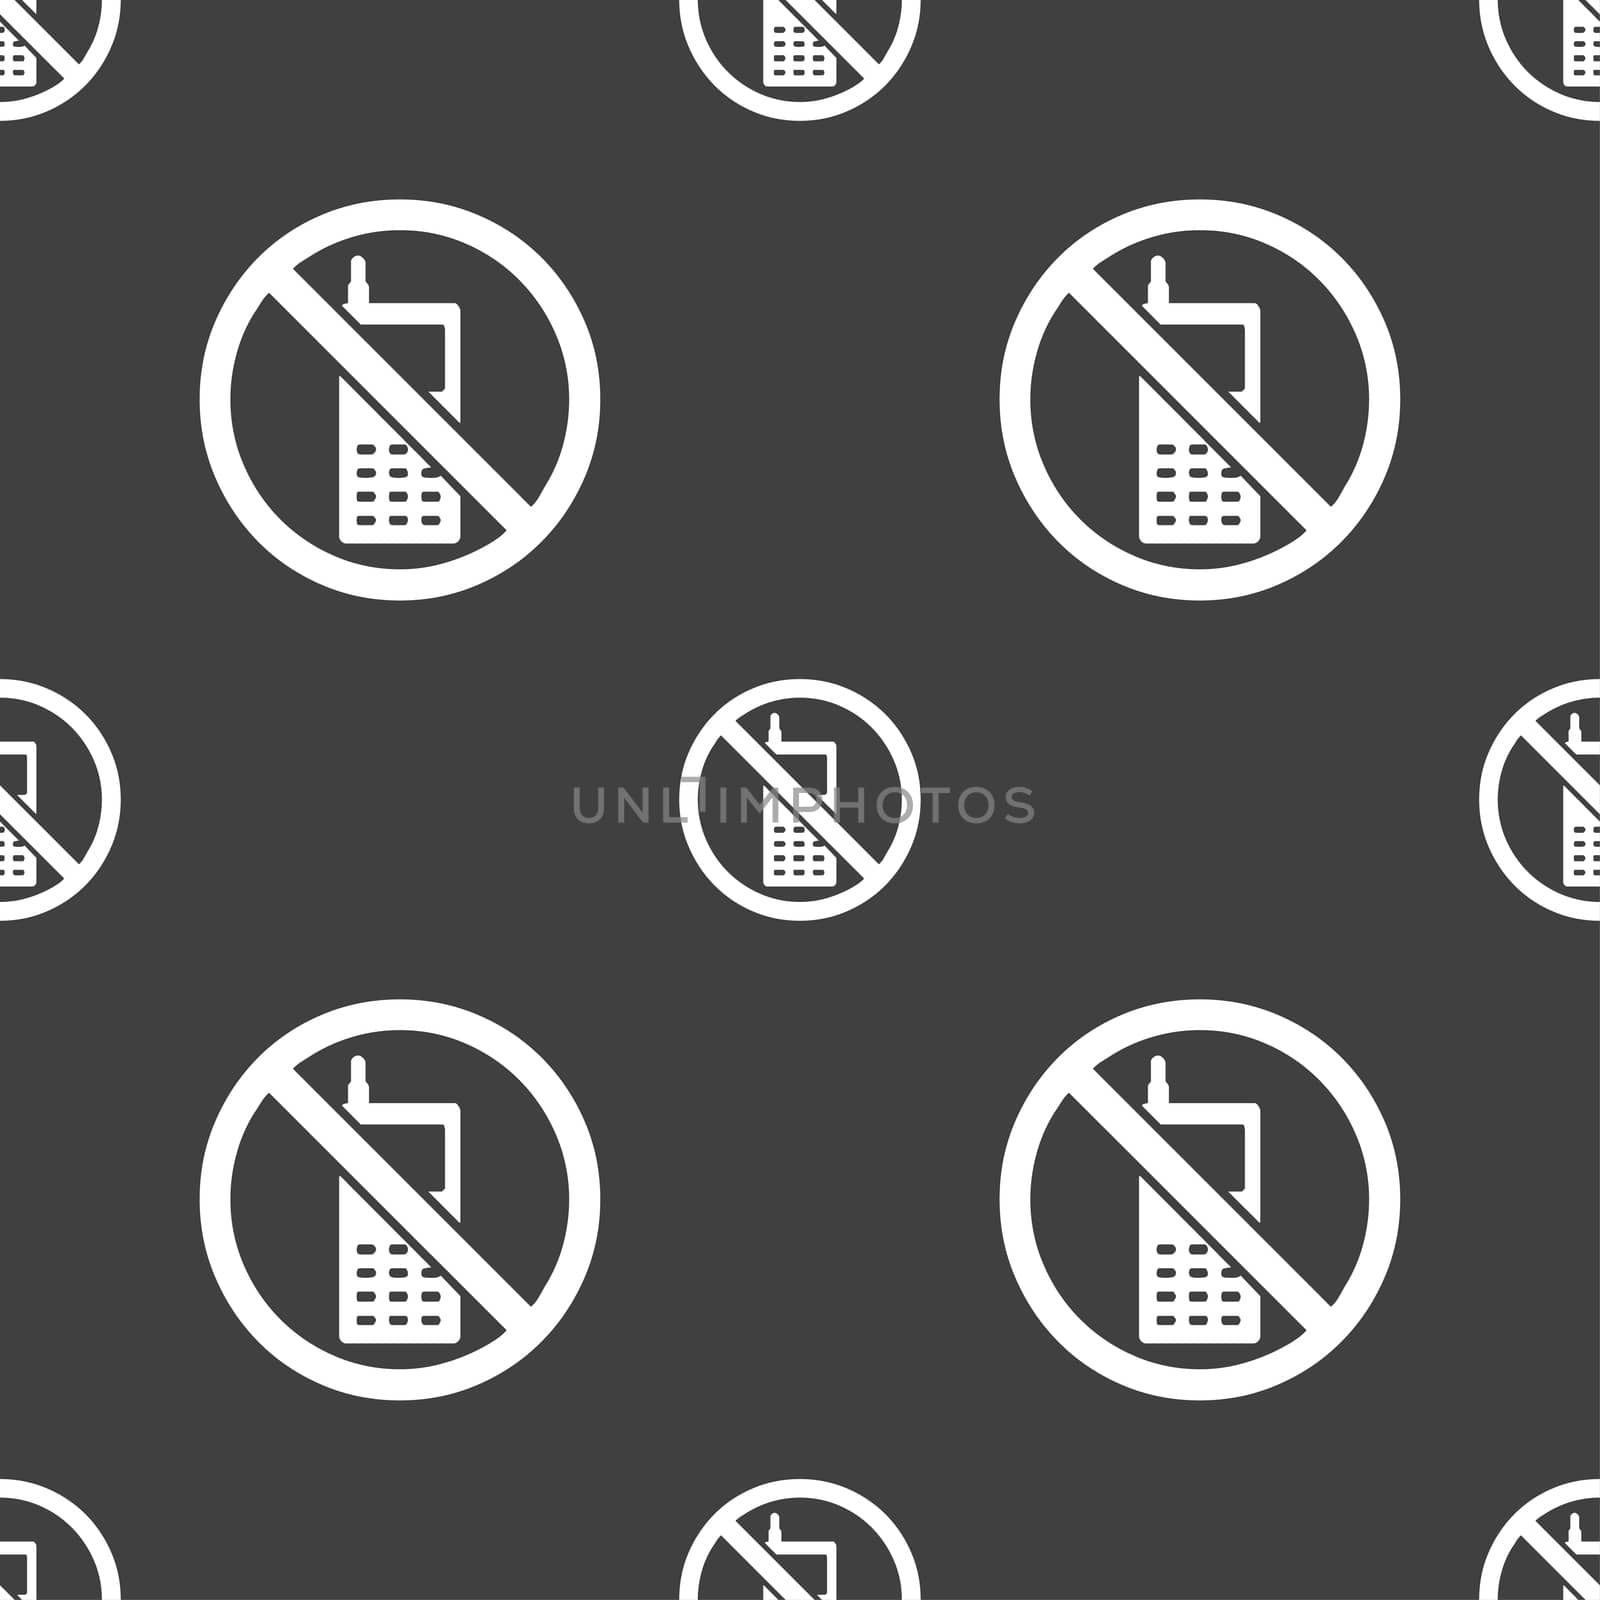 mobile phone is prohibited icon sign. Seamless pattern on a gray background. illustration